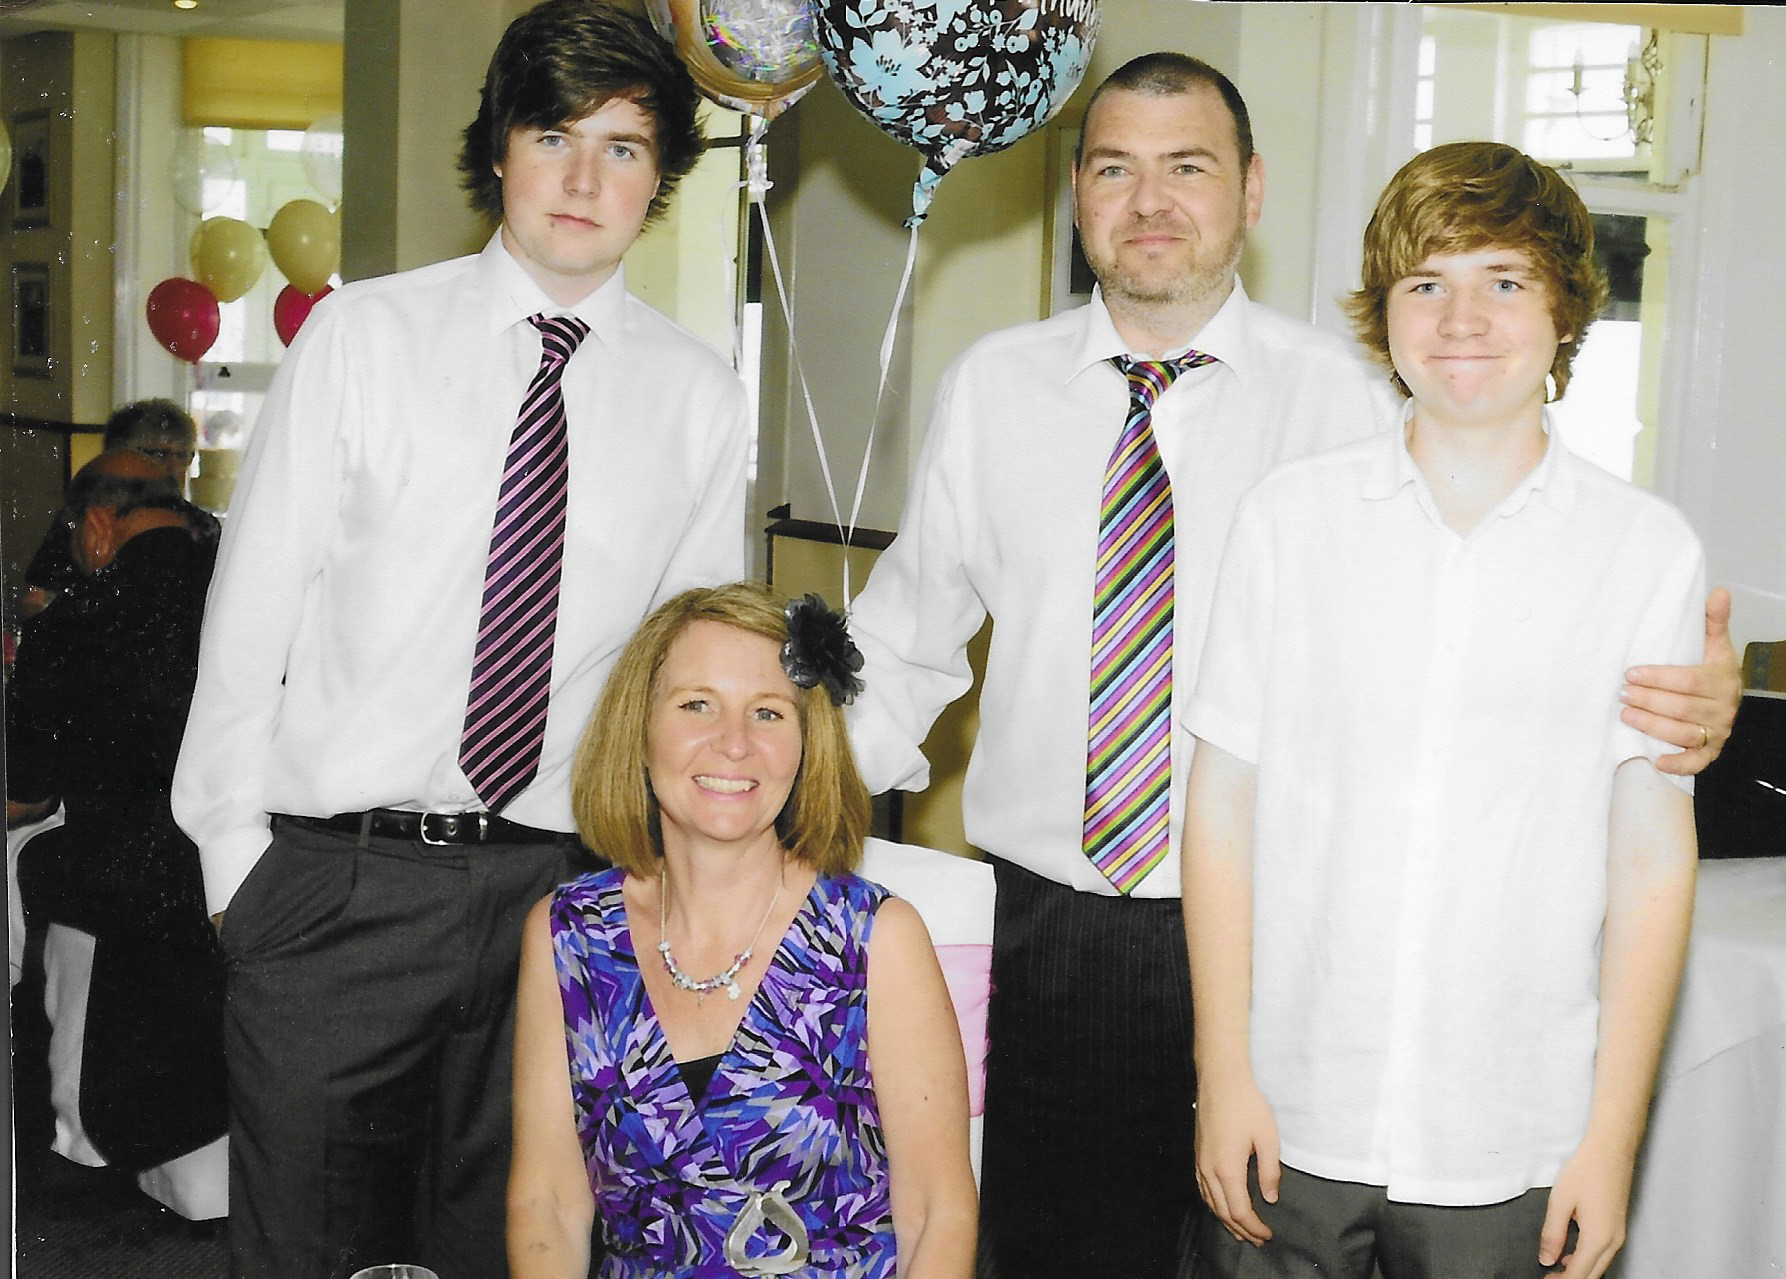 Ryan with brother Tom, mother Rachel and father Scott